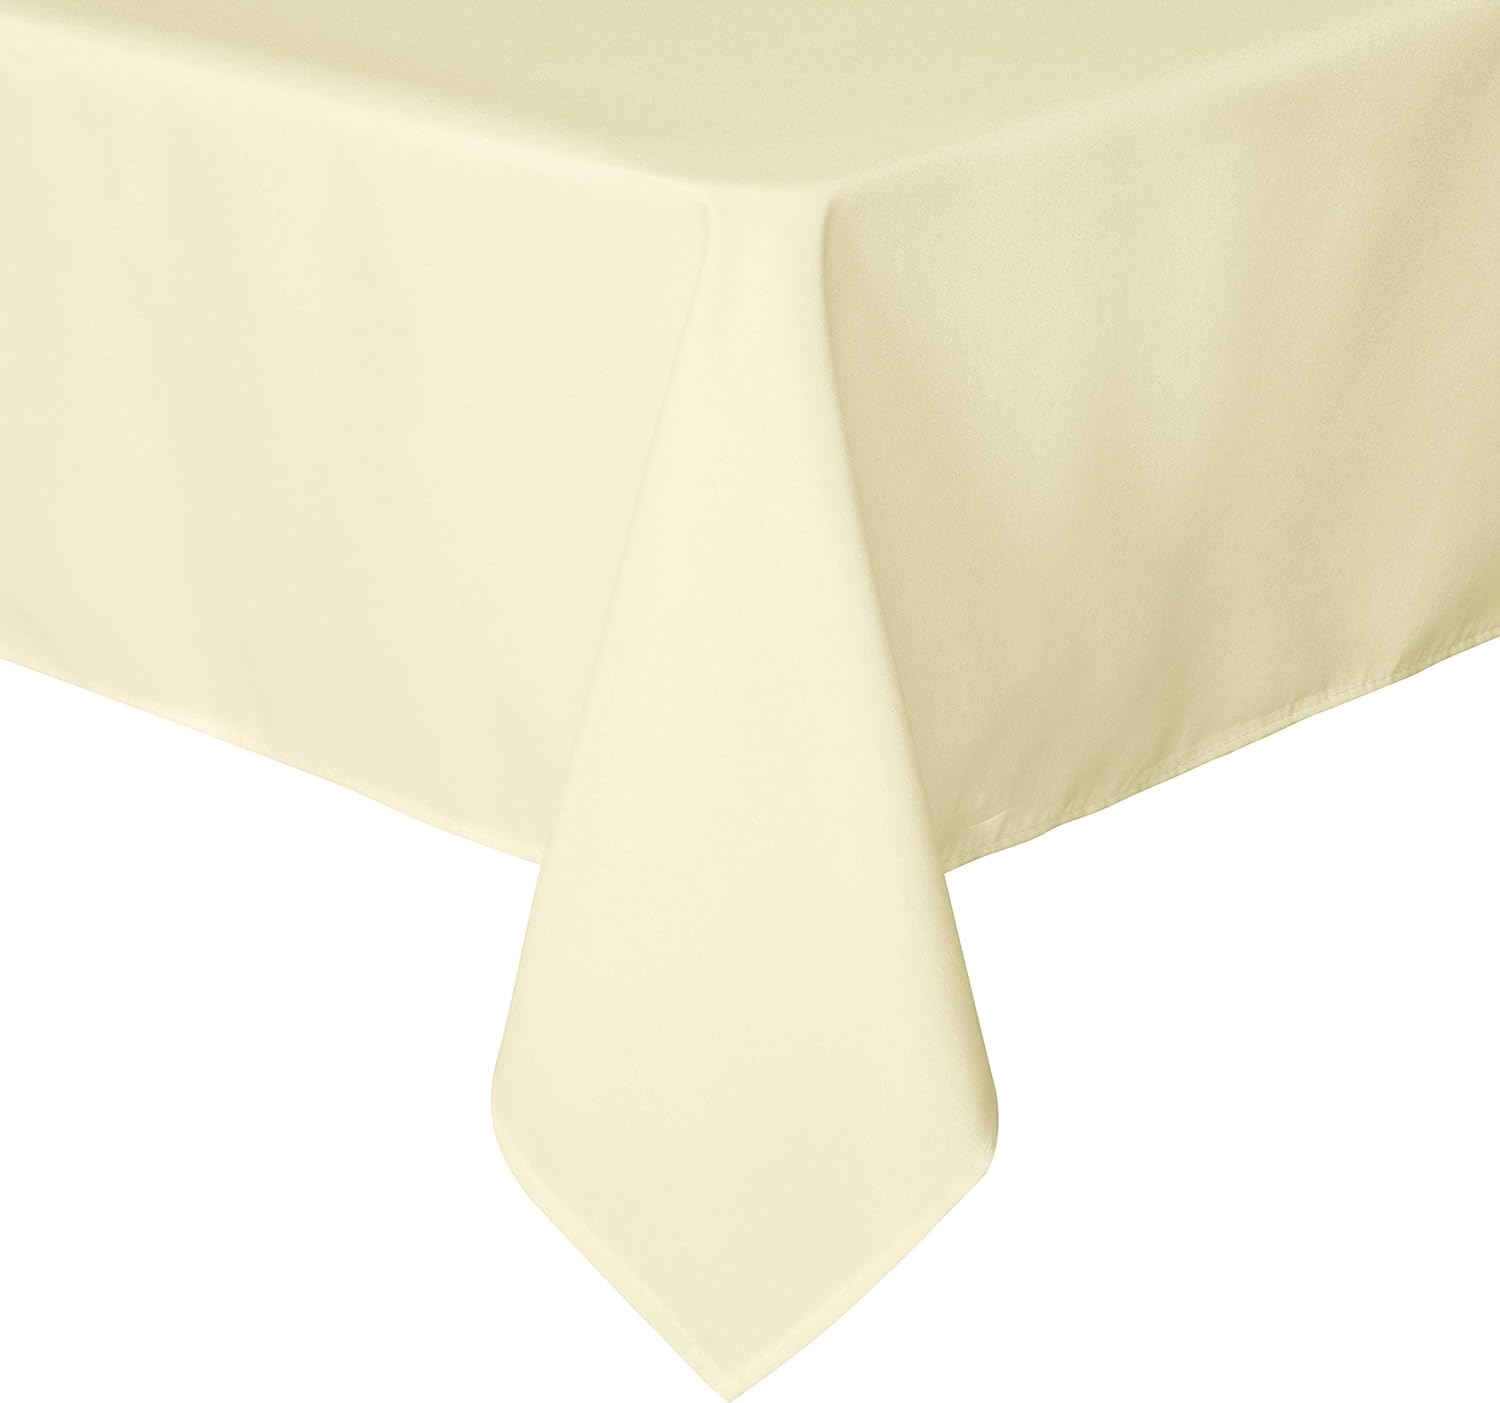 sancua Rectangle Tablecloth - 60 x 84 Inch - Stain and Wrinkle Resistant Washable Polyester Table Cloth, Decorative Fabric Table Cover for Dining Table, Buffet Parties and Camping, Beige